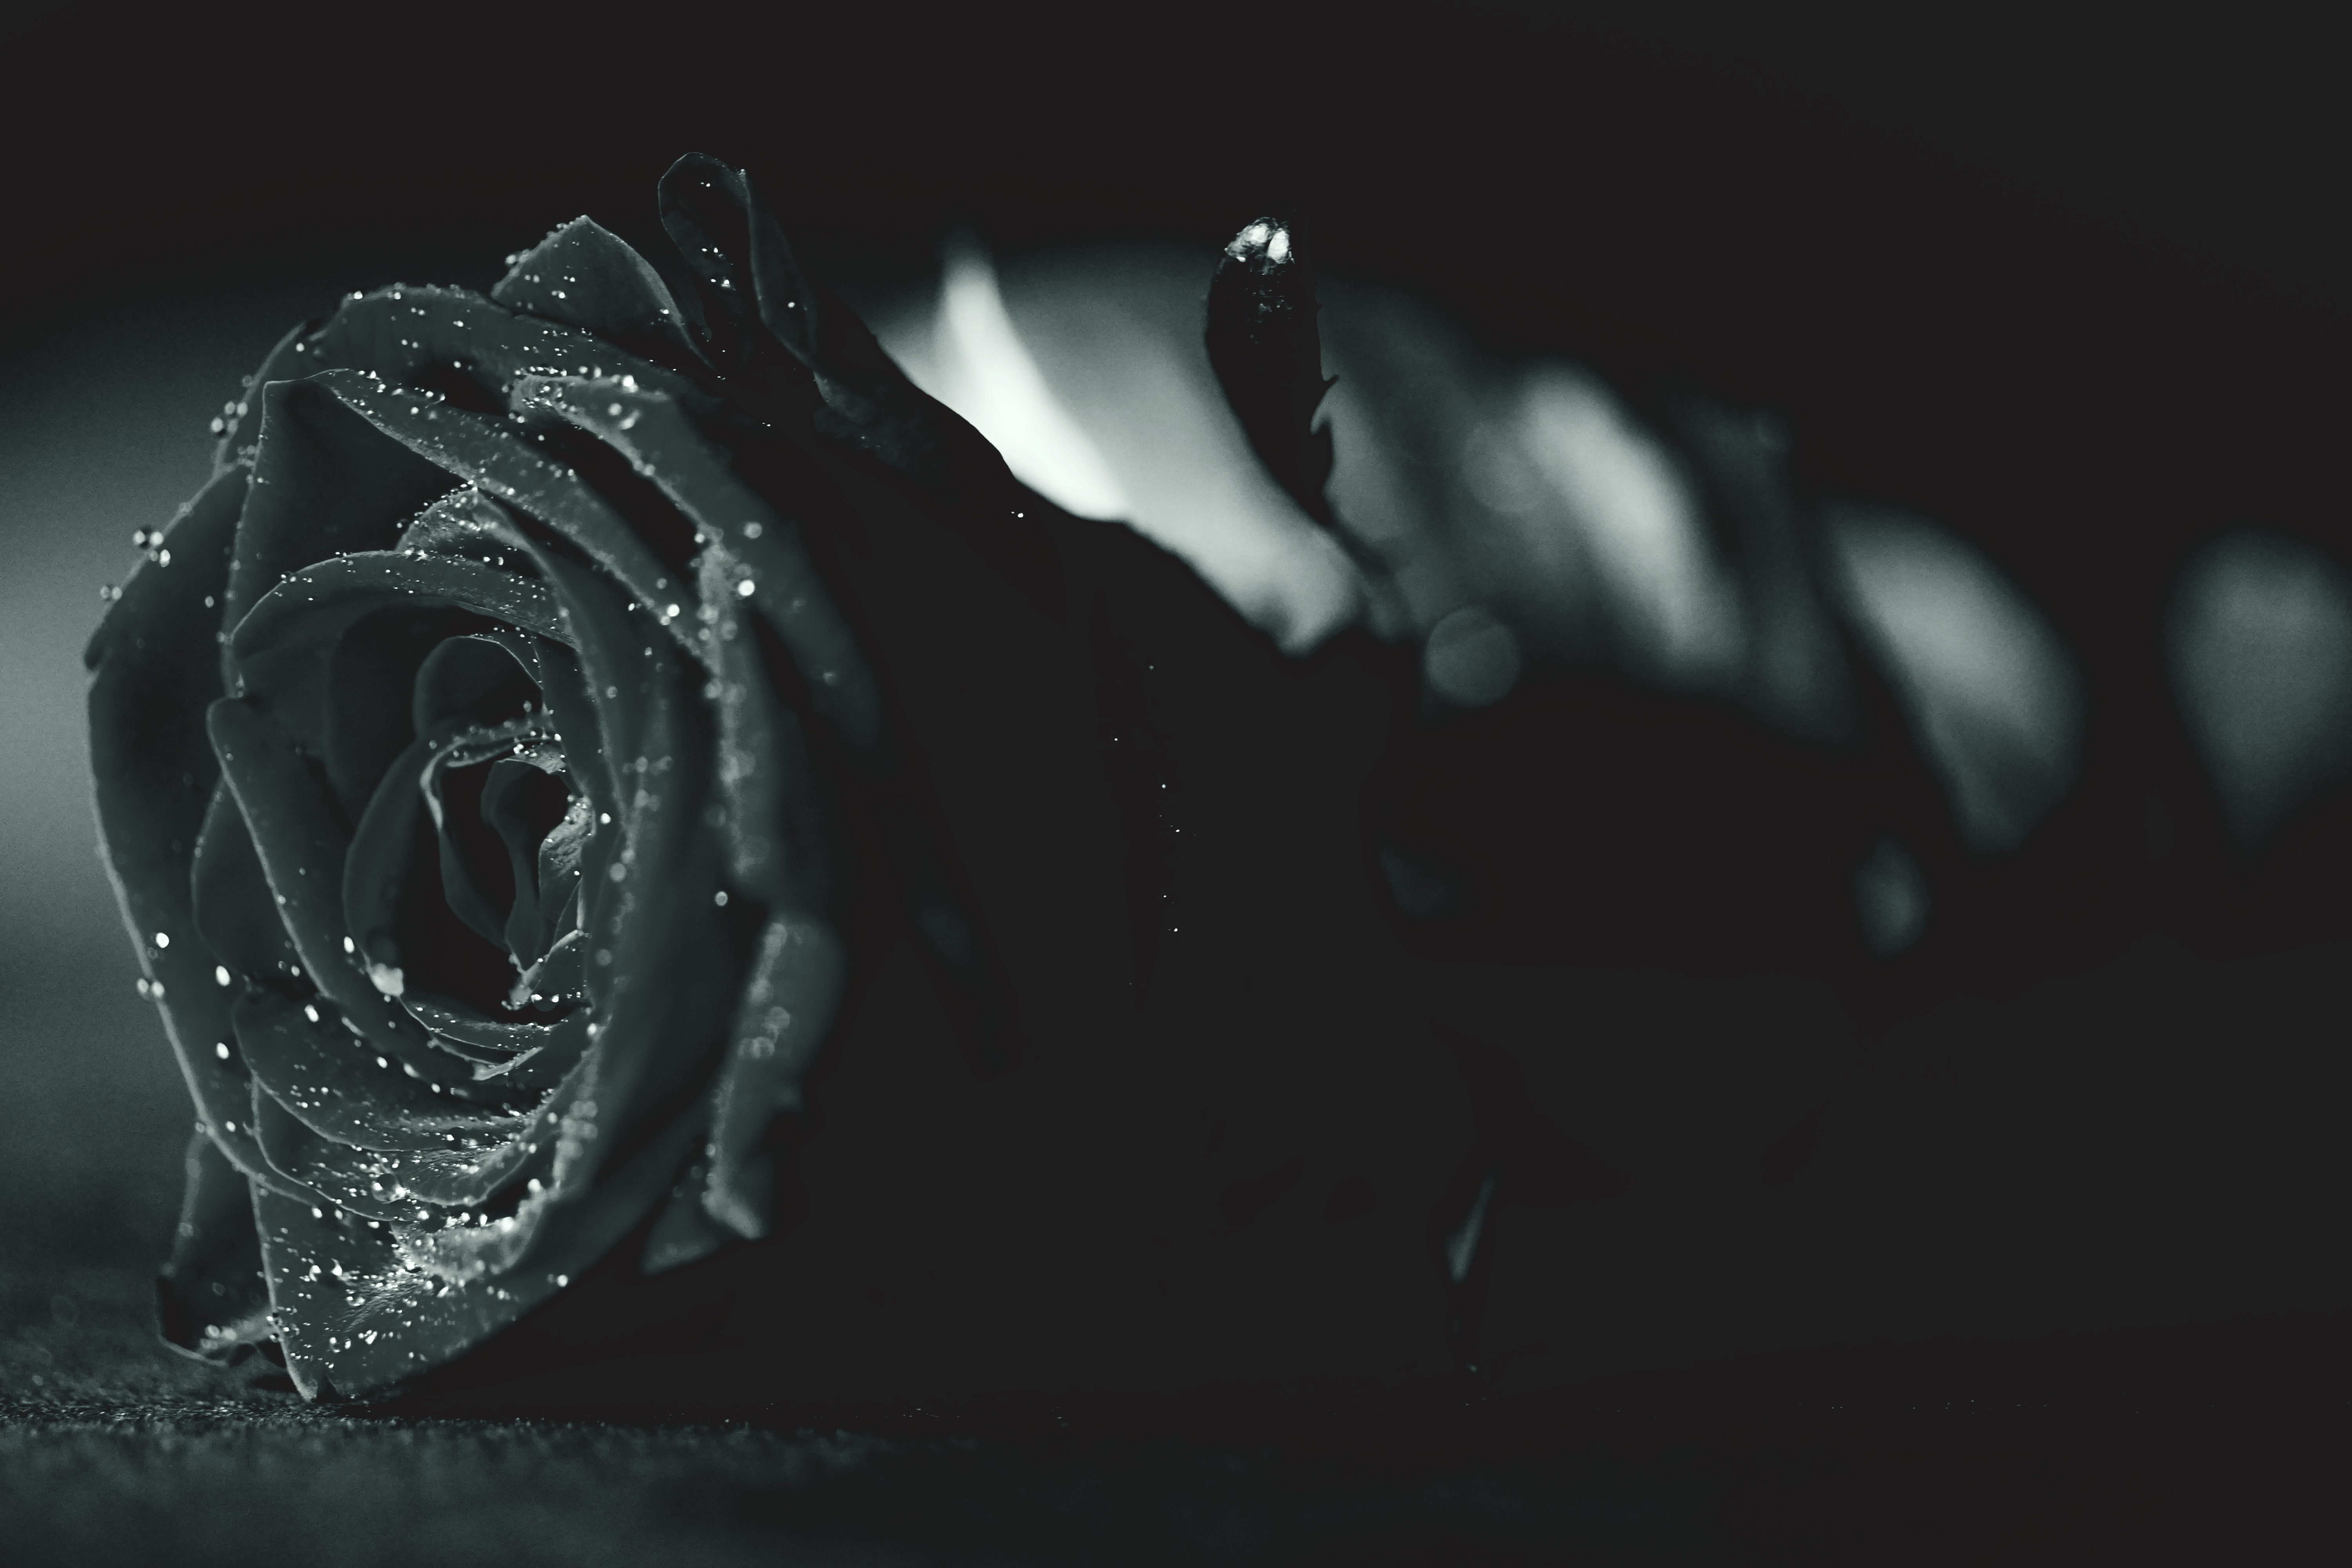 black rose with water drops wallpaper